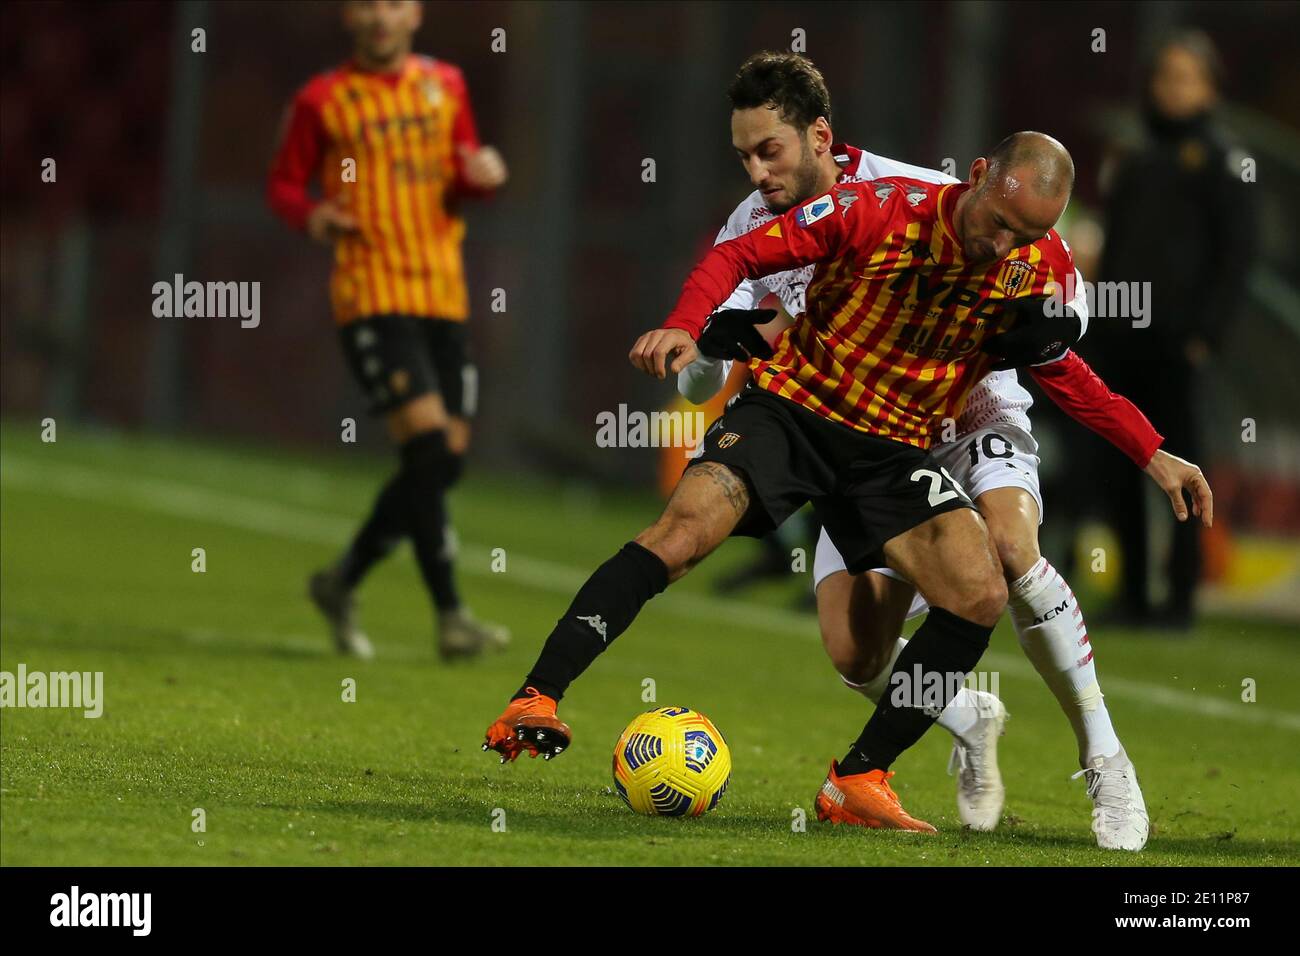 Milan’s Turkish midfielder Hakan Calhanoglu (L) challenges for the ball with Benevento's Italian midlefer Pasquale Schiattarella during the Serie A  football match Benevento vs  Ac Milan Stock Photo